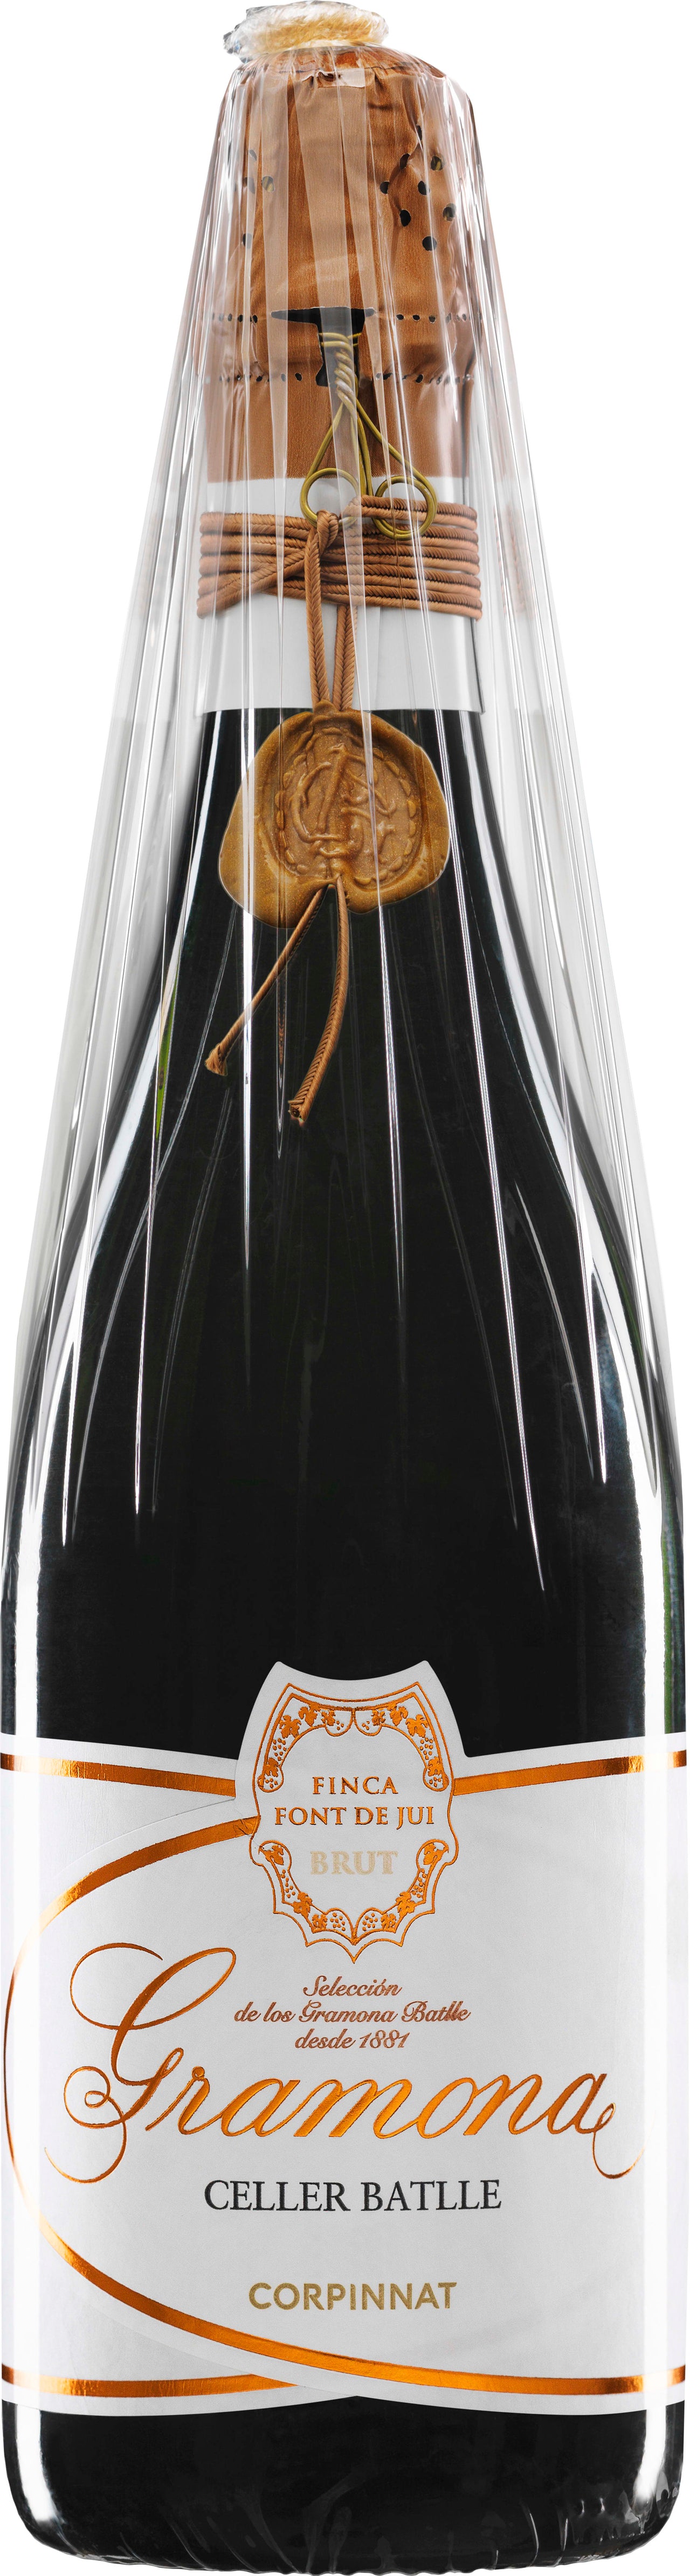 Gramona Celler Batlle Brut 2010 75cl - Buy Gramona Wines from GREAT WINES DIRECT wine shop